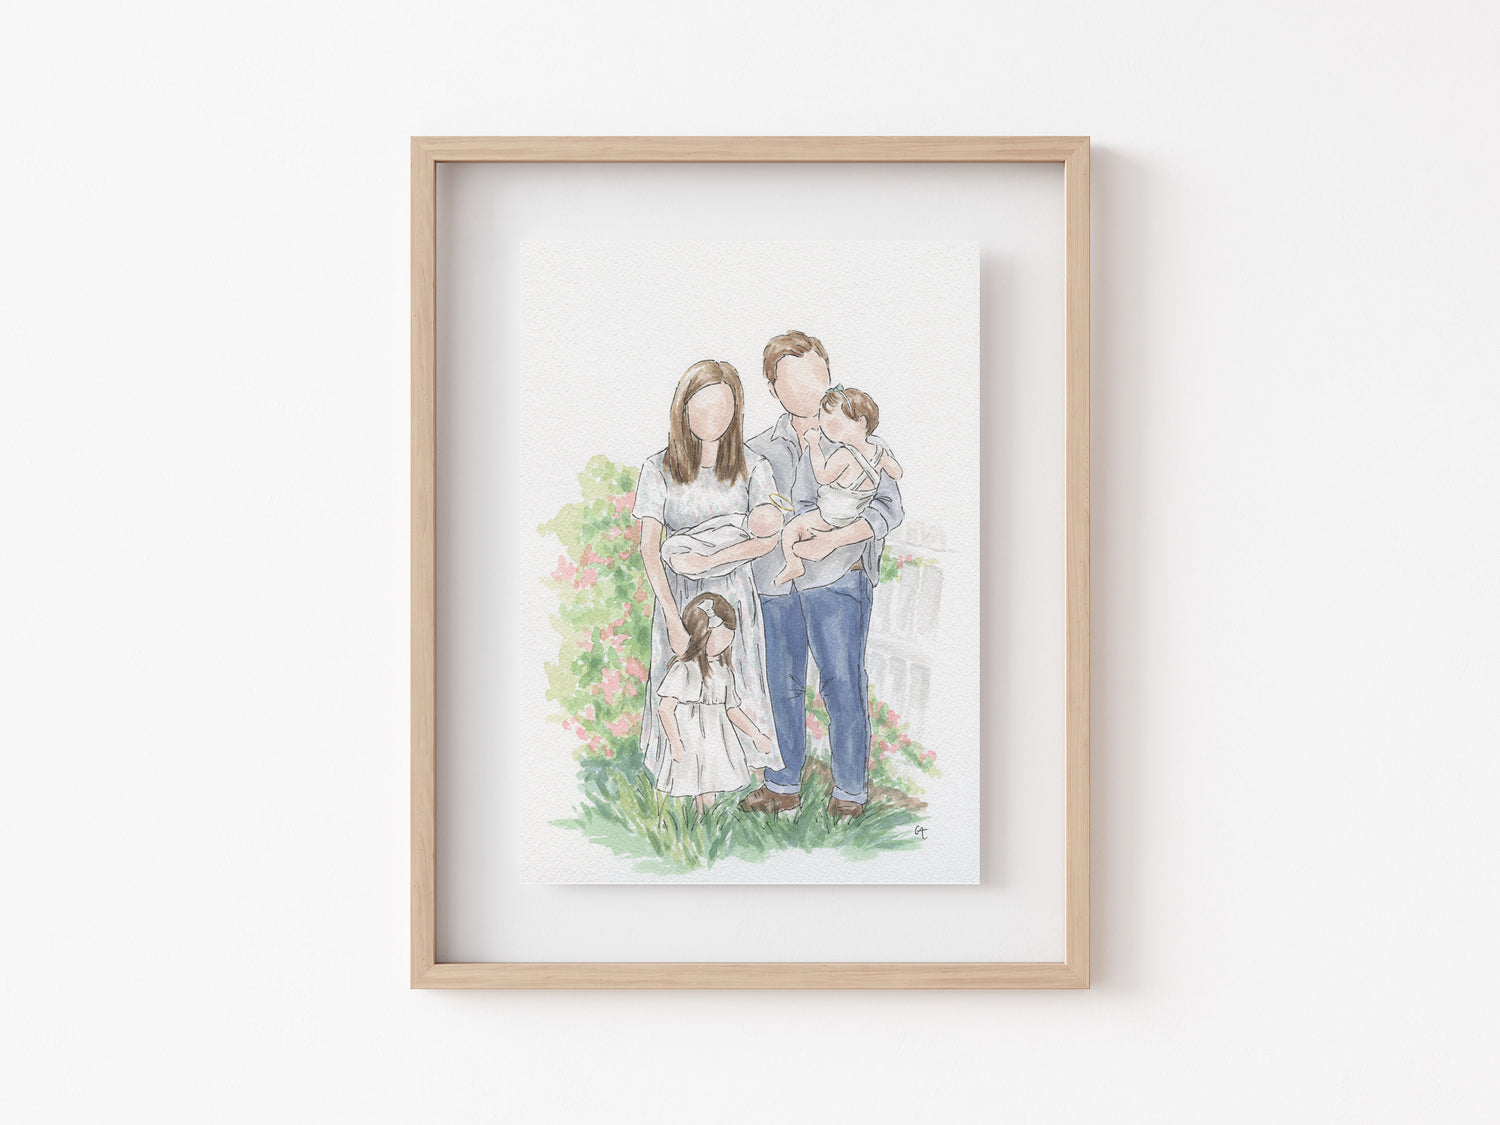 Family watercolor portrait gift for losing child, painted in memory of new baby for mom and dad, faceless portrait style with full watercolor background from photo | Custom Watercolor Wedding Invitations, Dallas, Texas | By Caroline Ann